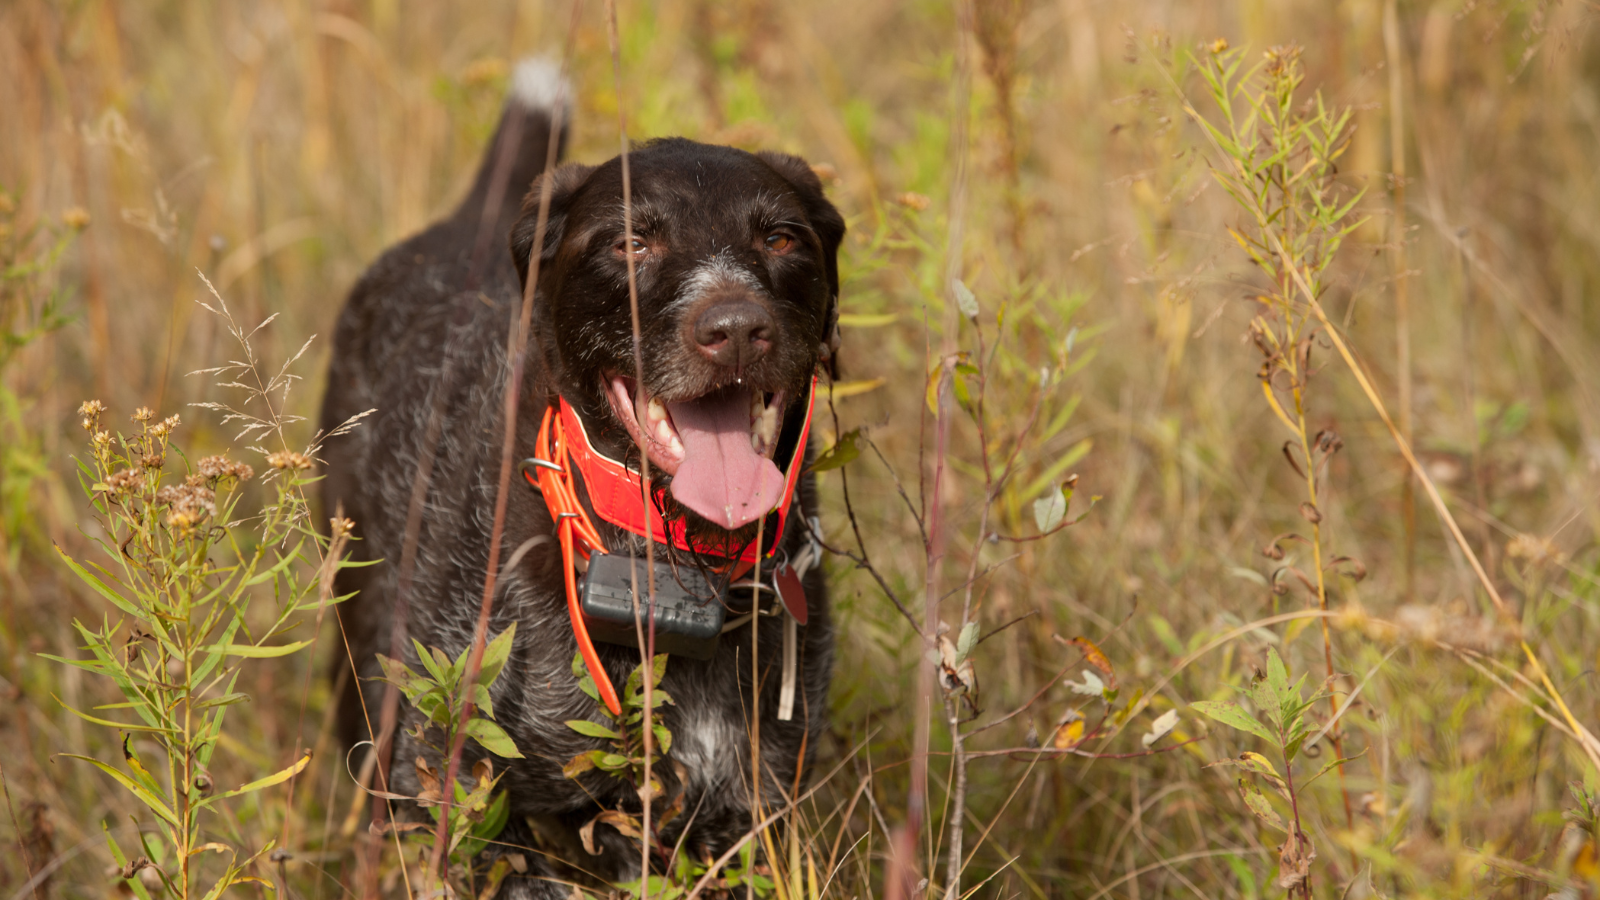 Hunting Dog Accessories